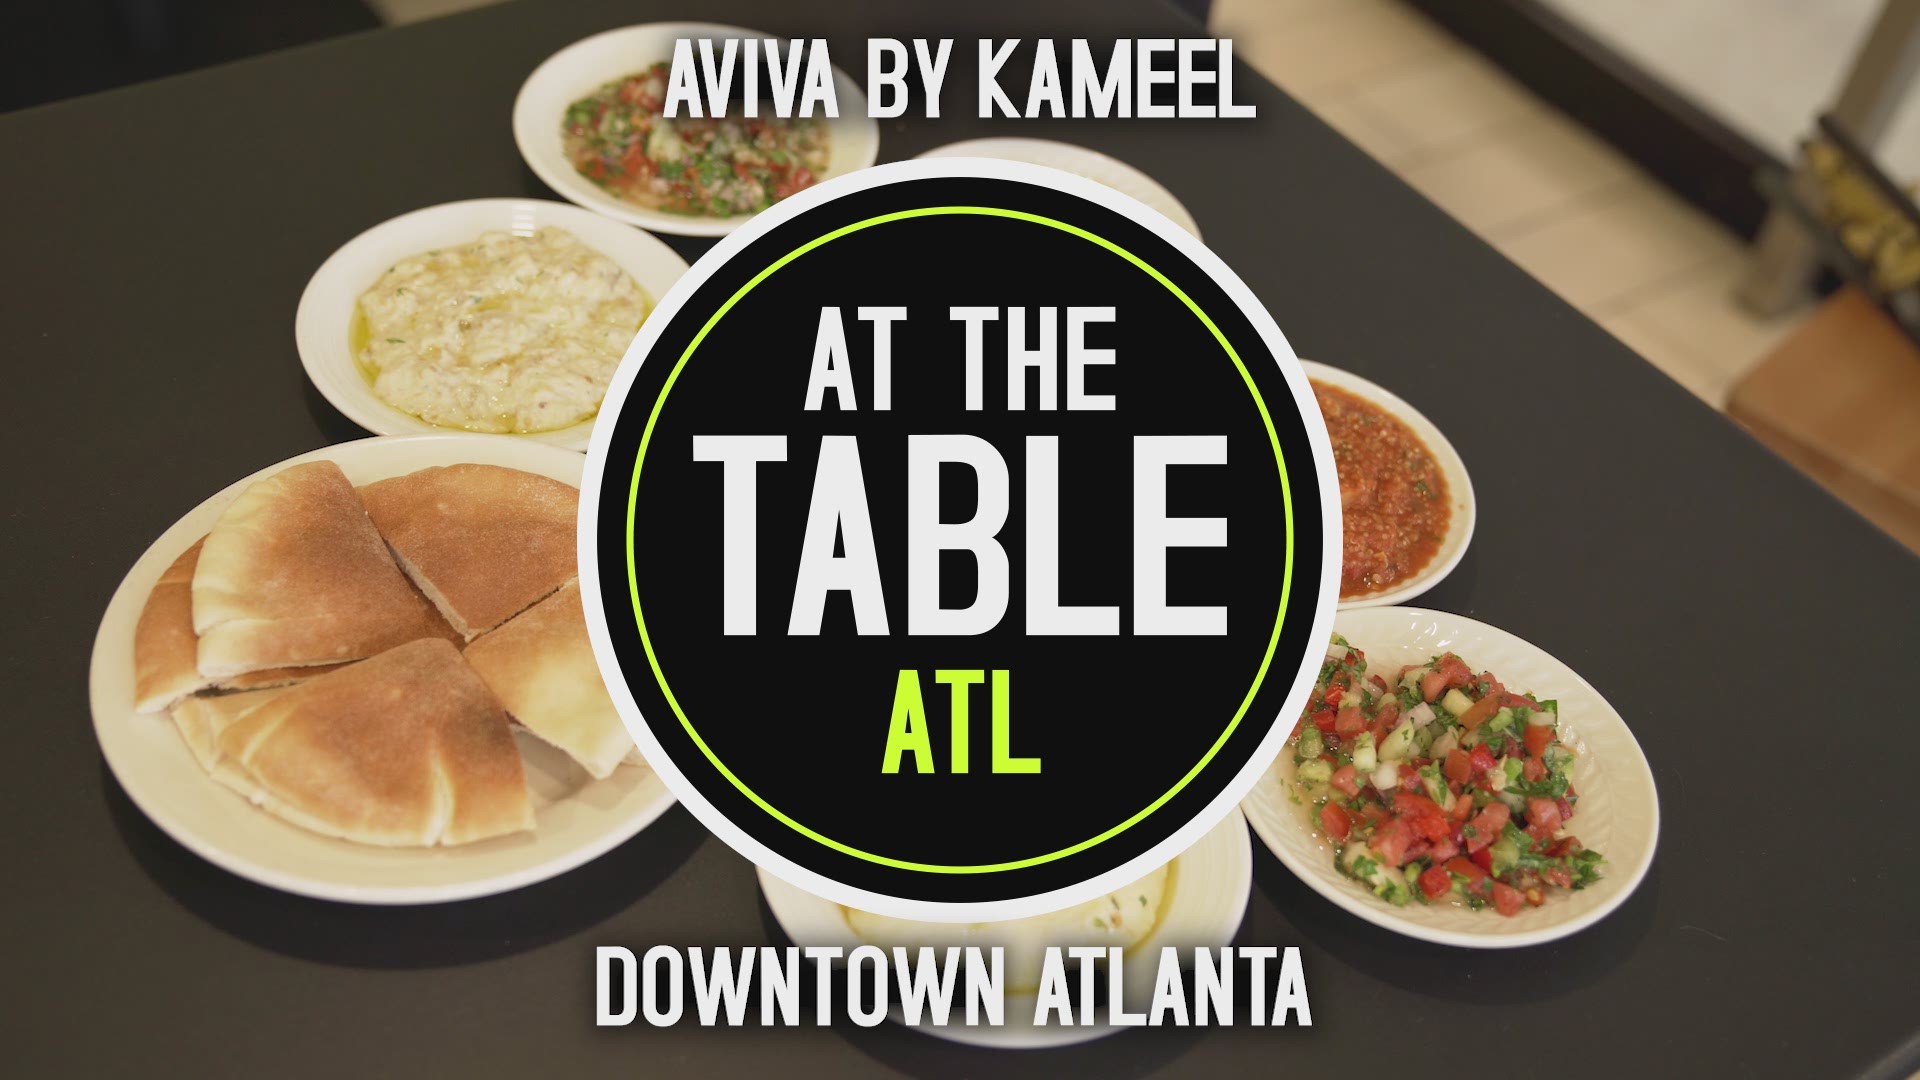 Aviva by Kameel is a go-to dining destination in Atlanta’s Peachtree Center